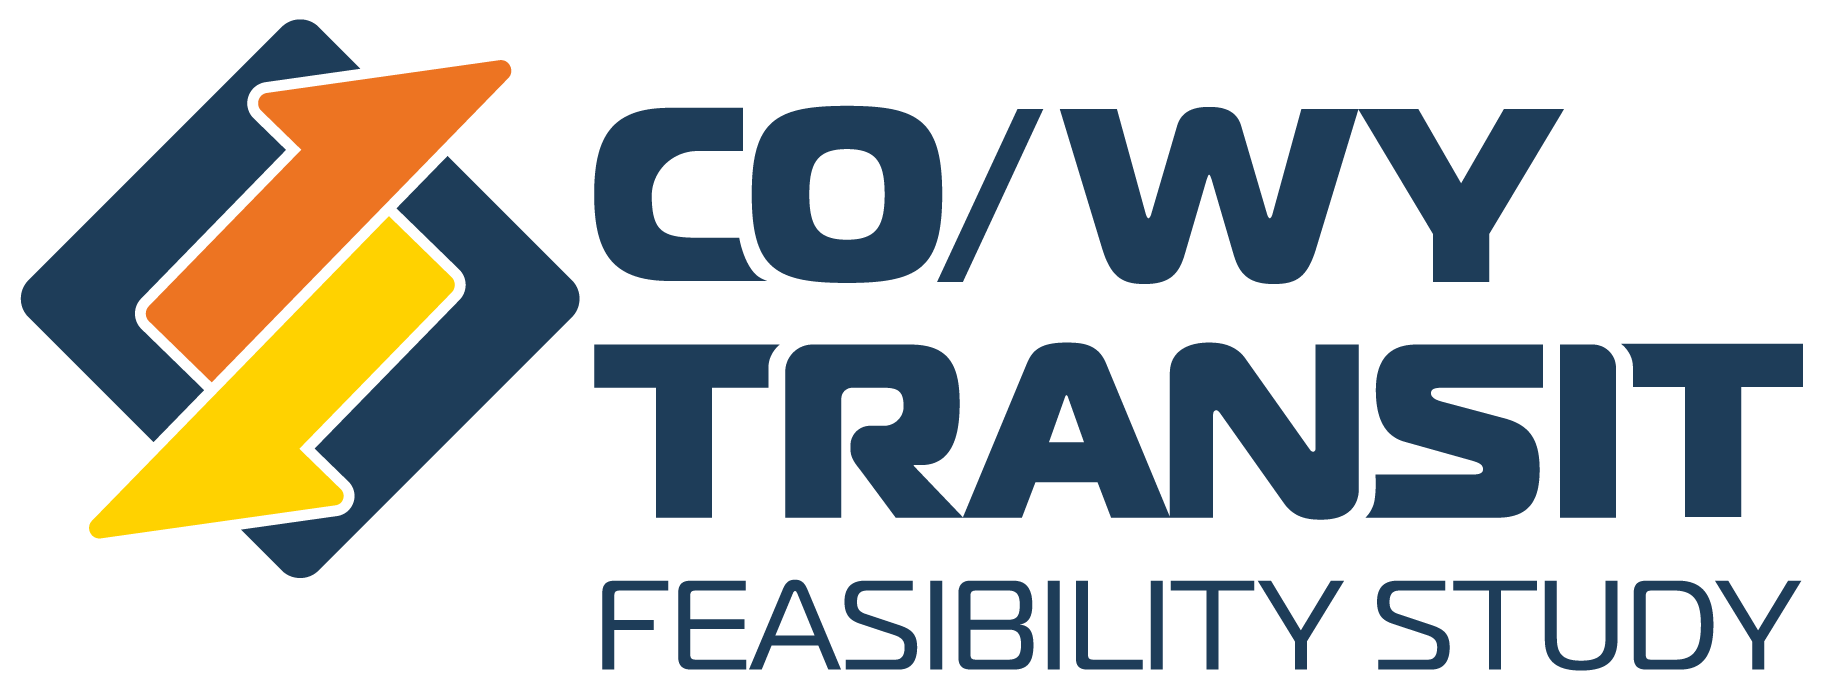 Northern Colorado-Southern Wyoming Transit Feasibility Study